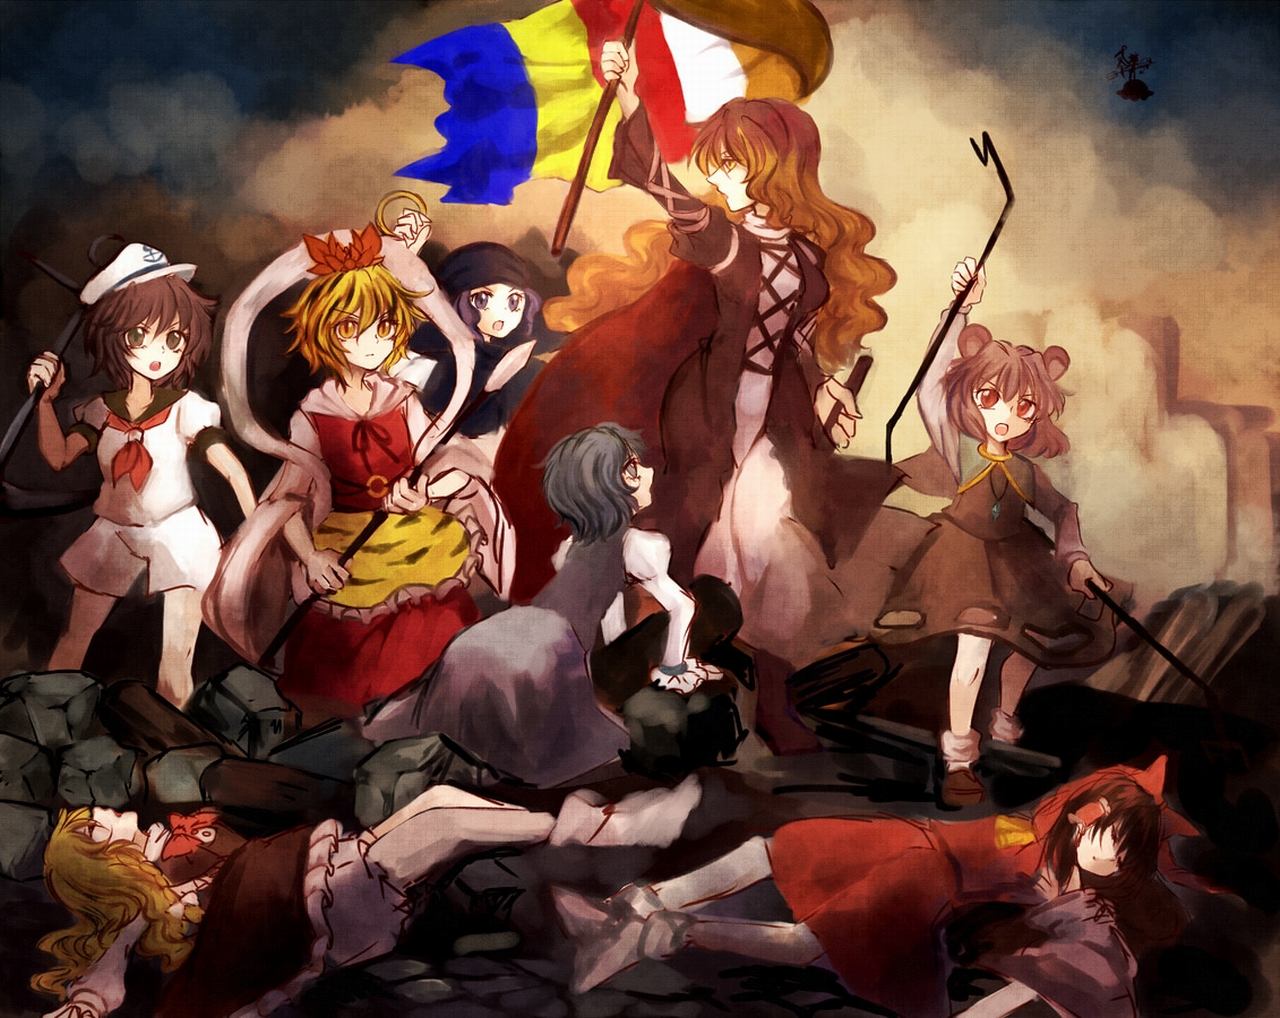 Touhou Liberty Leading The People